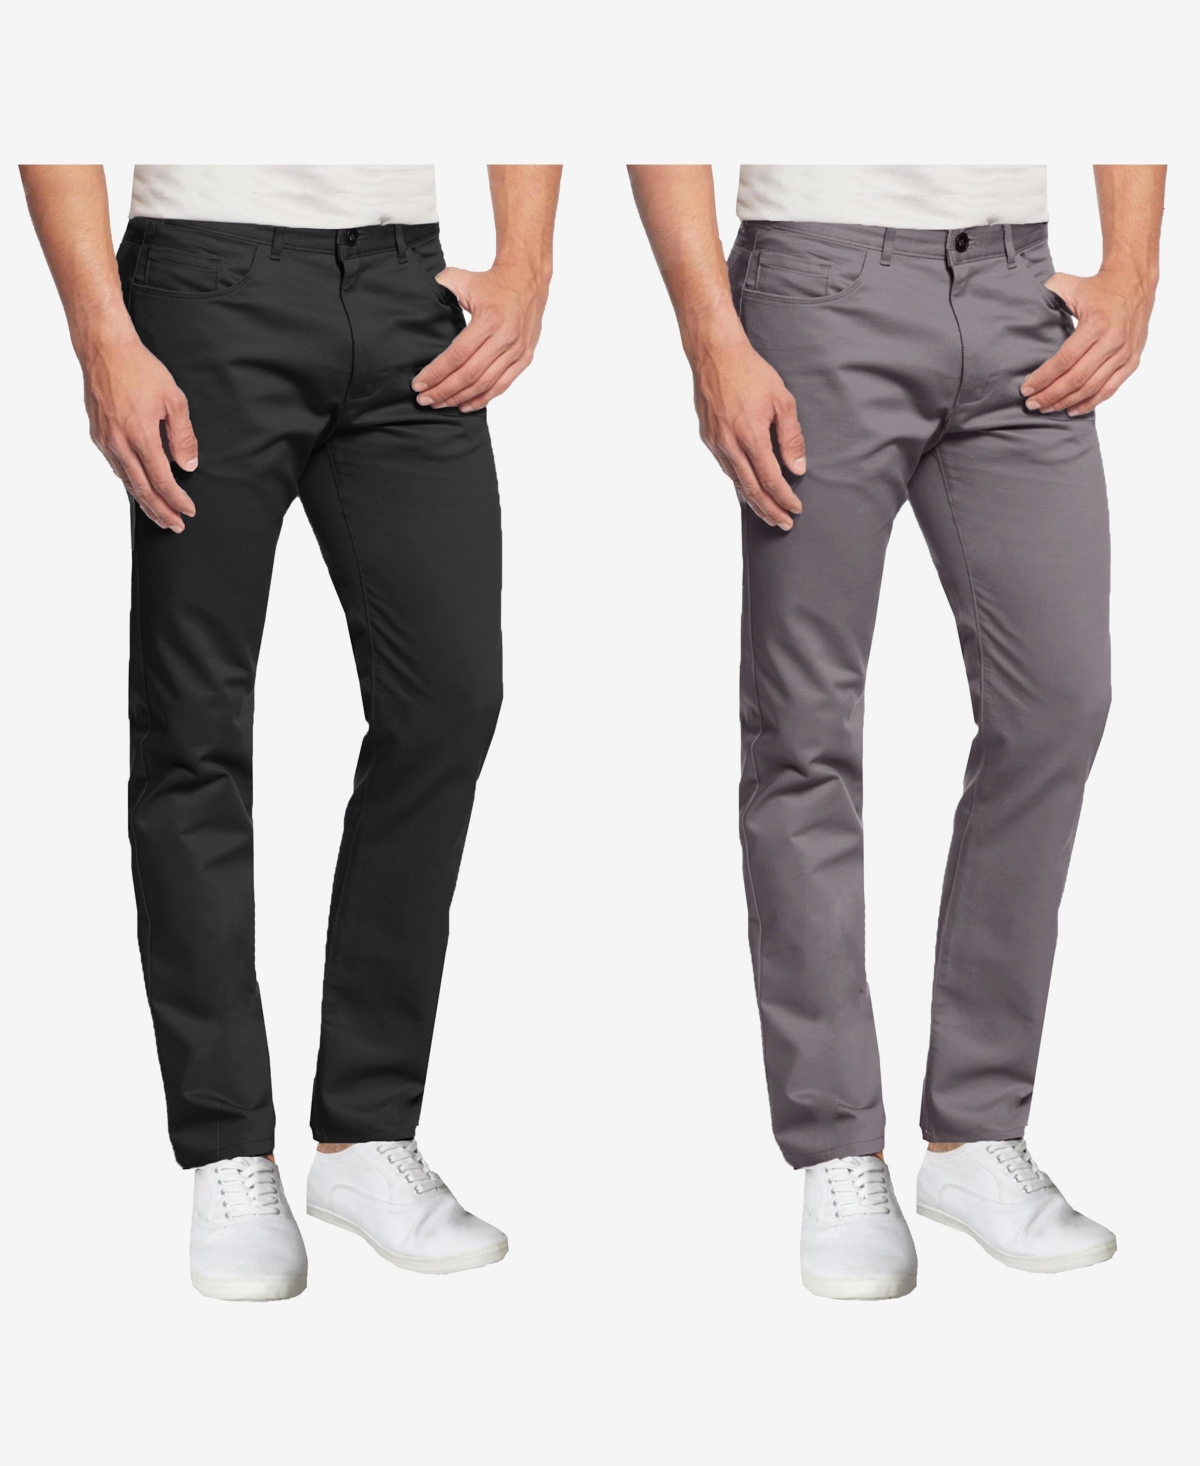 Galaxy By Harvic Men's 5-pocket Ultra-stretch Skinny Fit Chino Pants, Pack Of 2 In Black,dark Gray